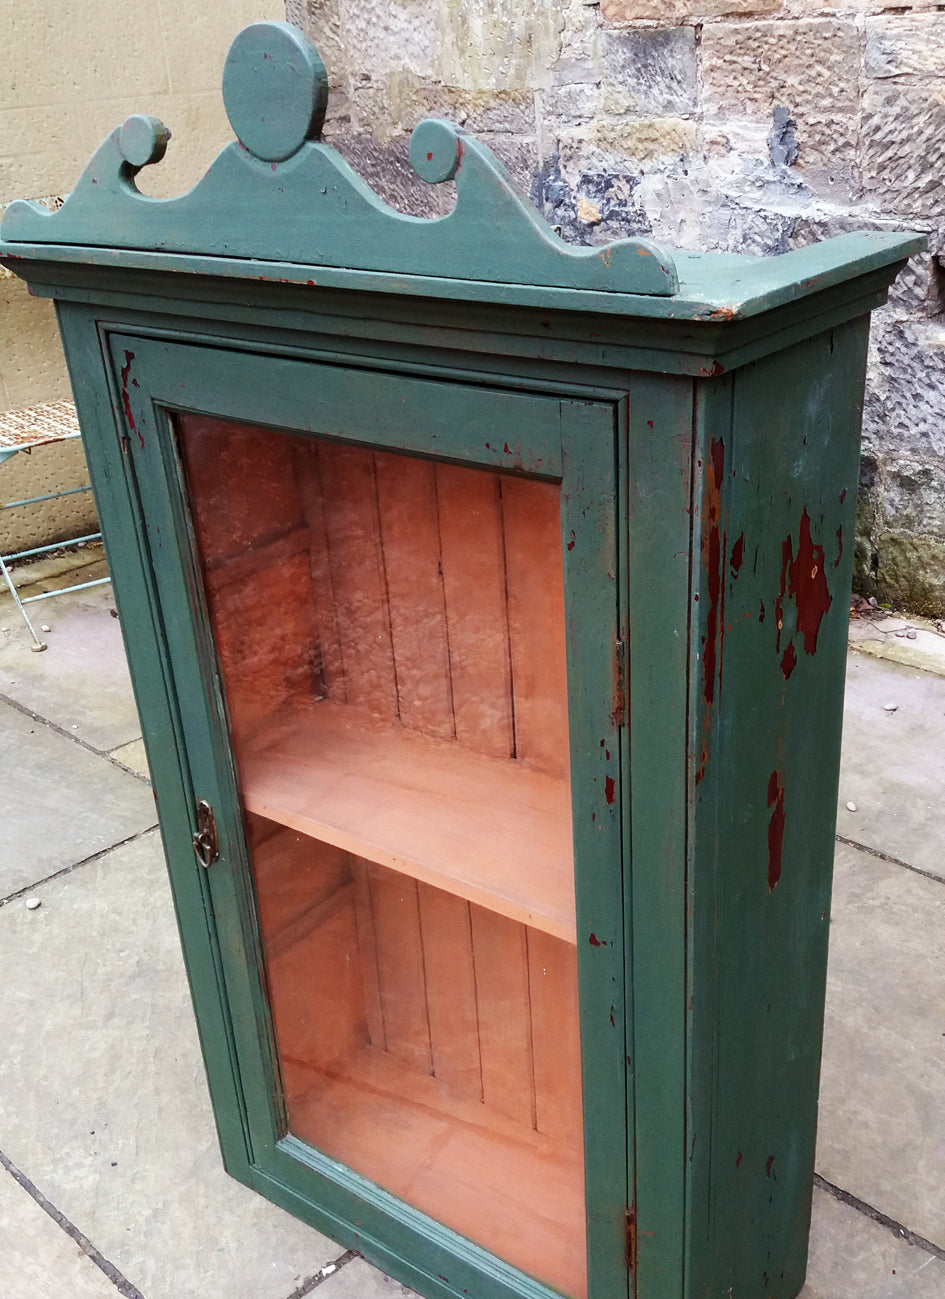 Vintage glass fronted cabinet in an antique chippy milk paint finish